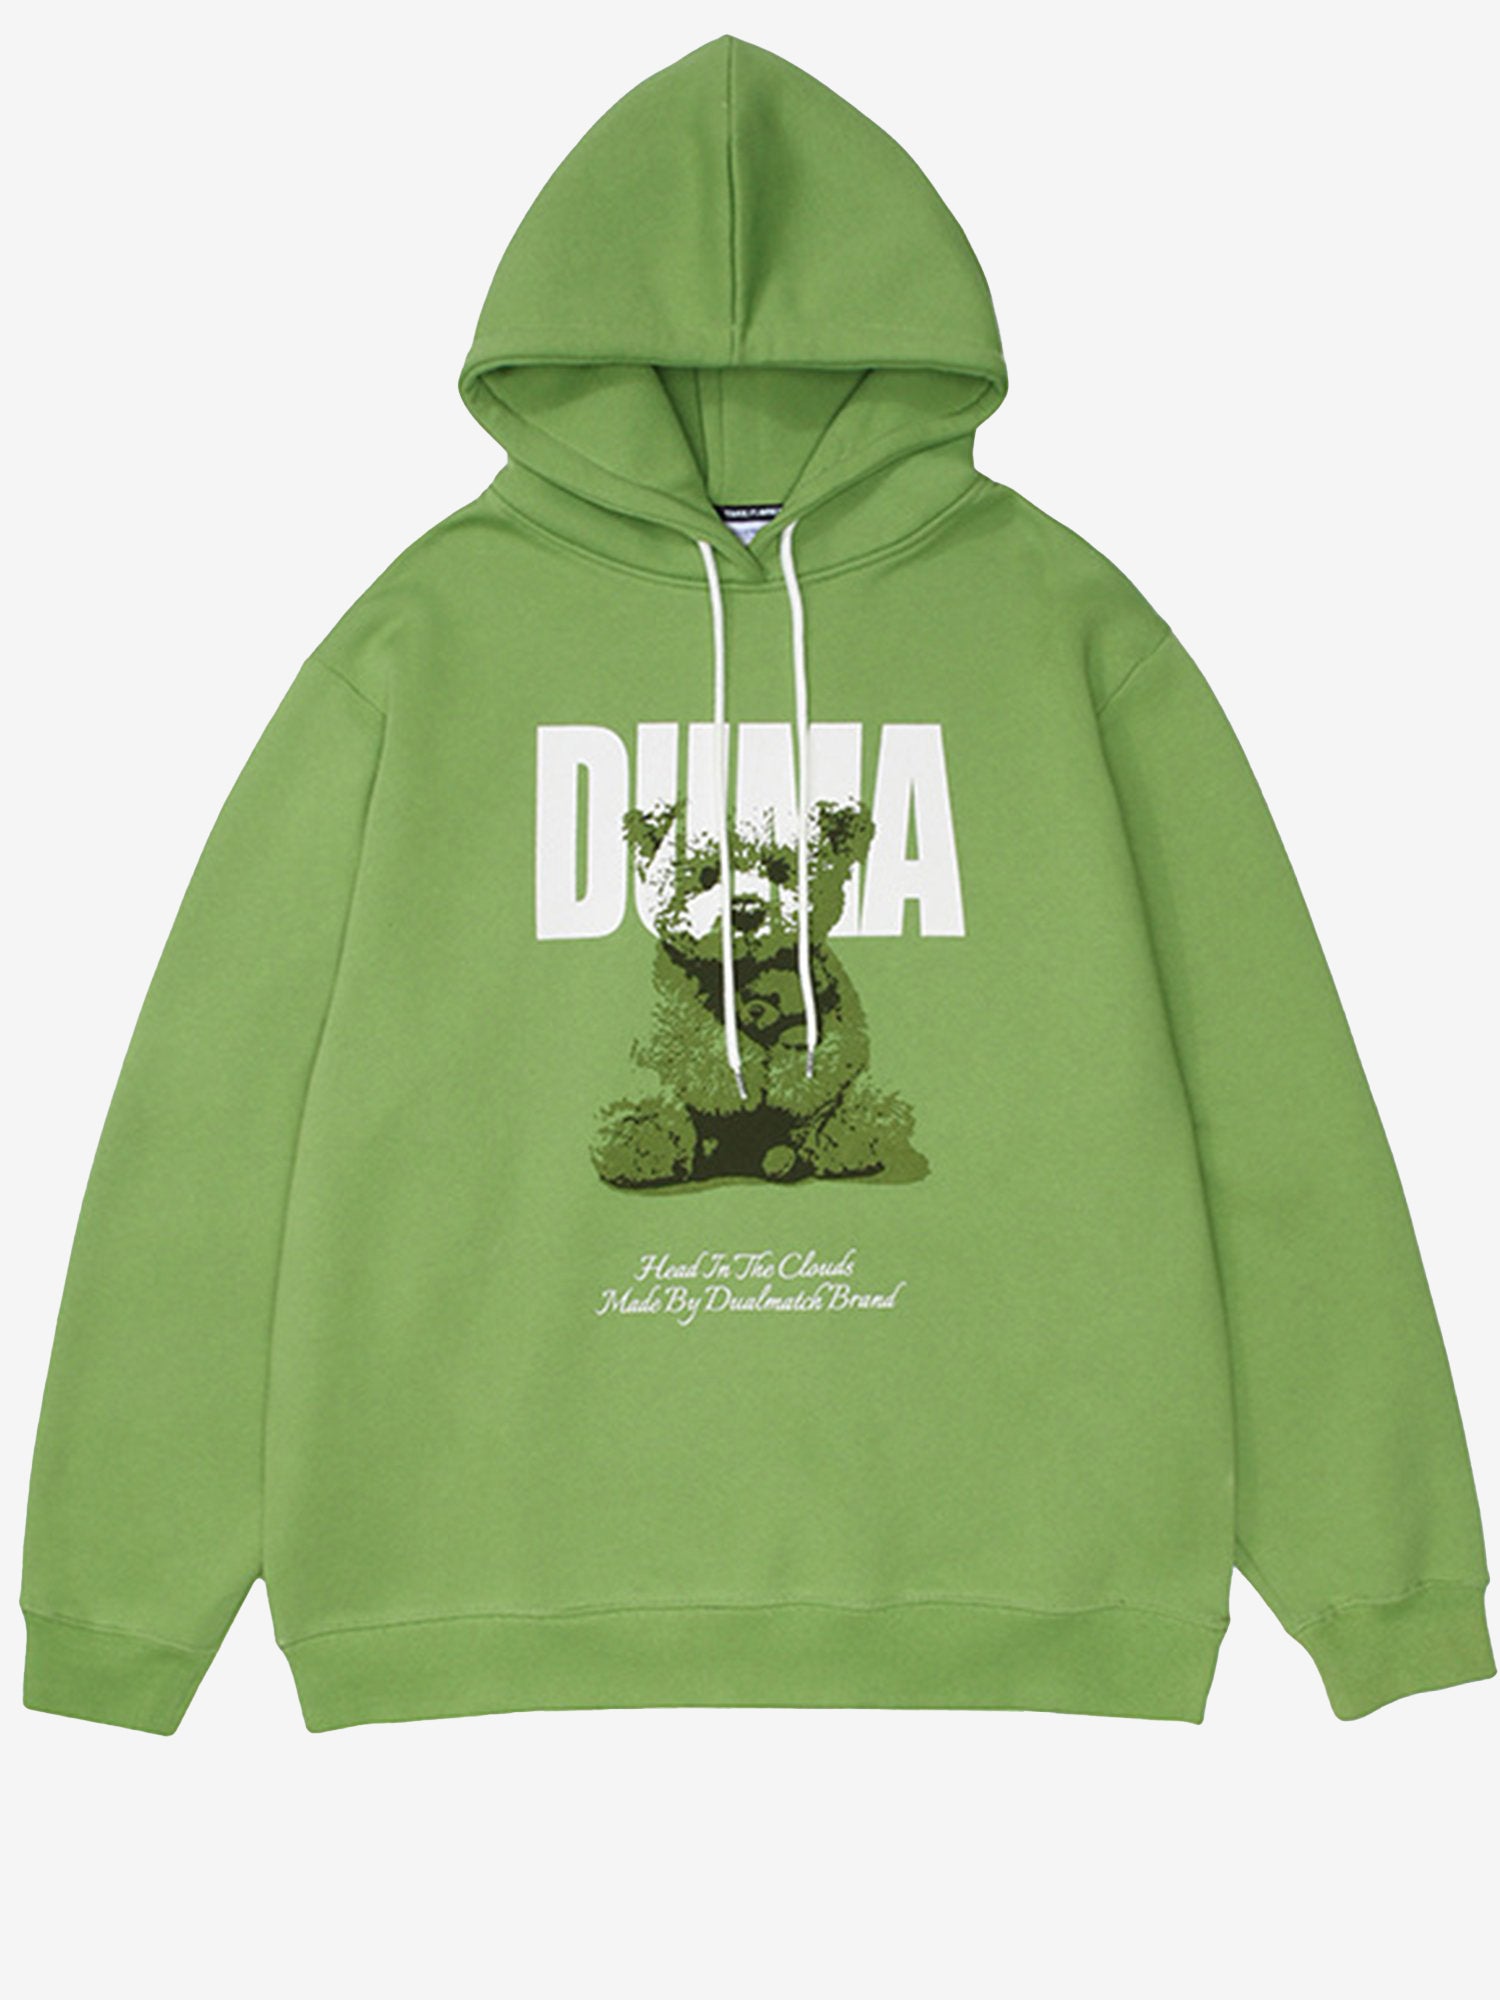 JUSTNOTAG Casual Print Cotton Hooded Hoodies